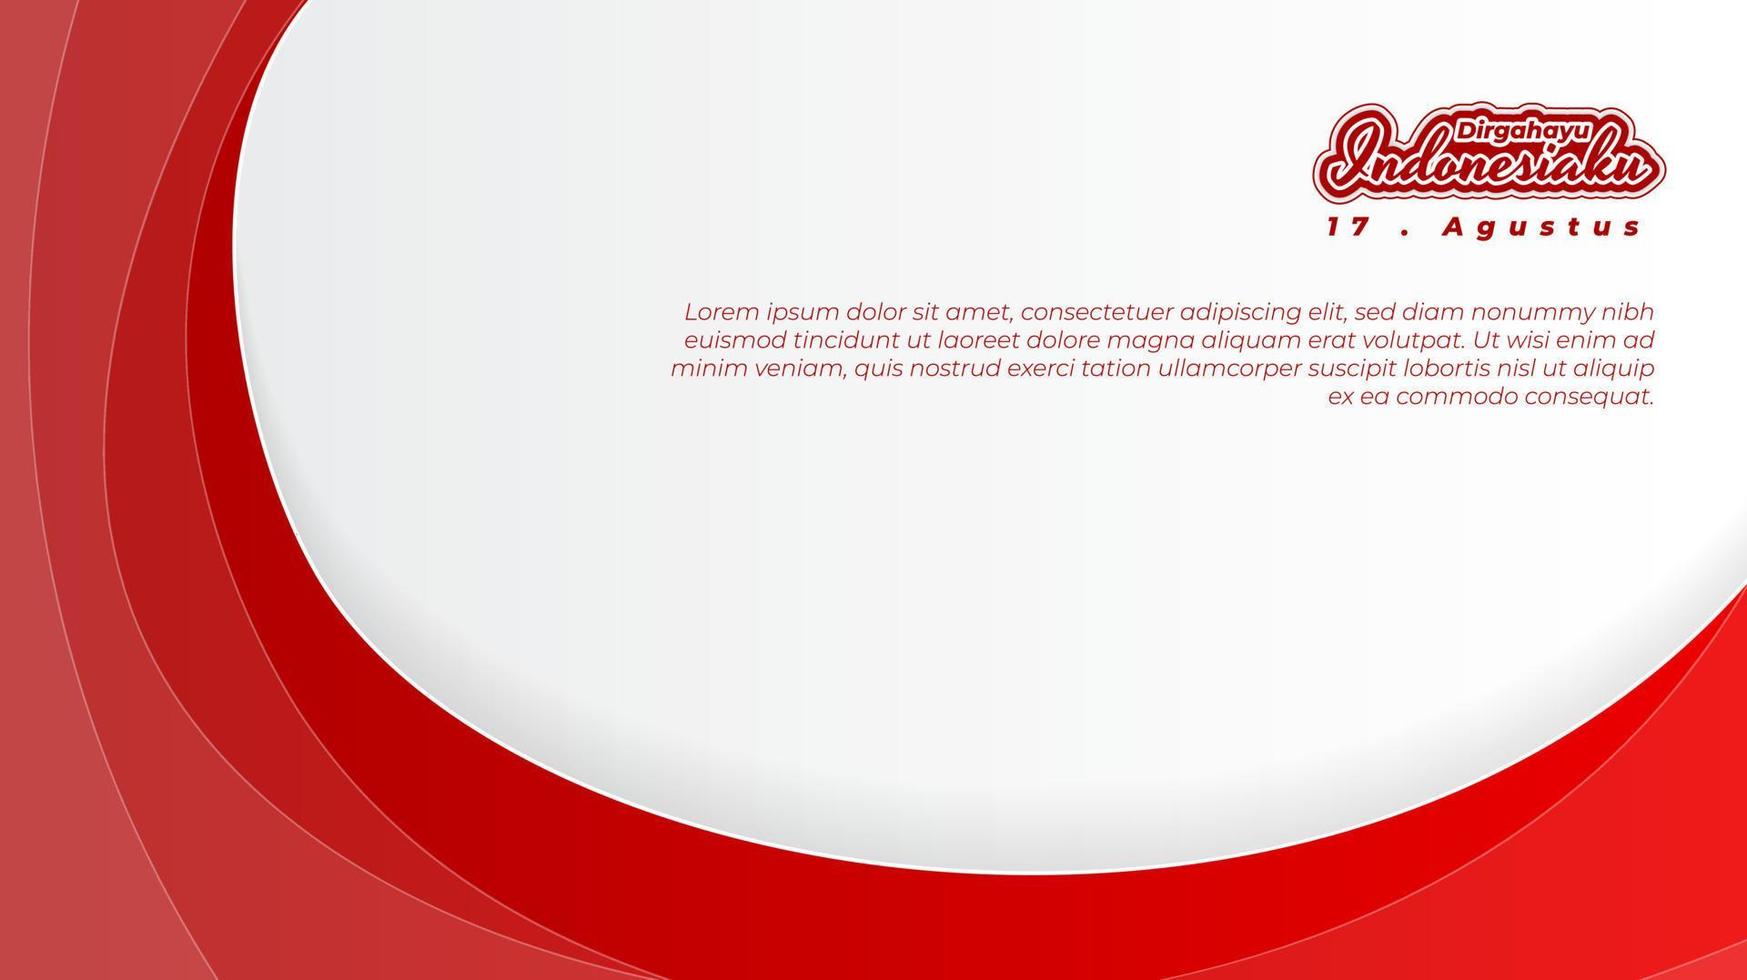 Waving red shape design in white background for indonesia independence day and indonesian text mean is longevity my indonesia vector